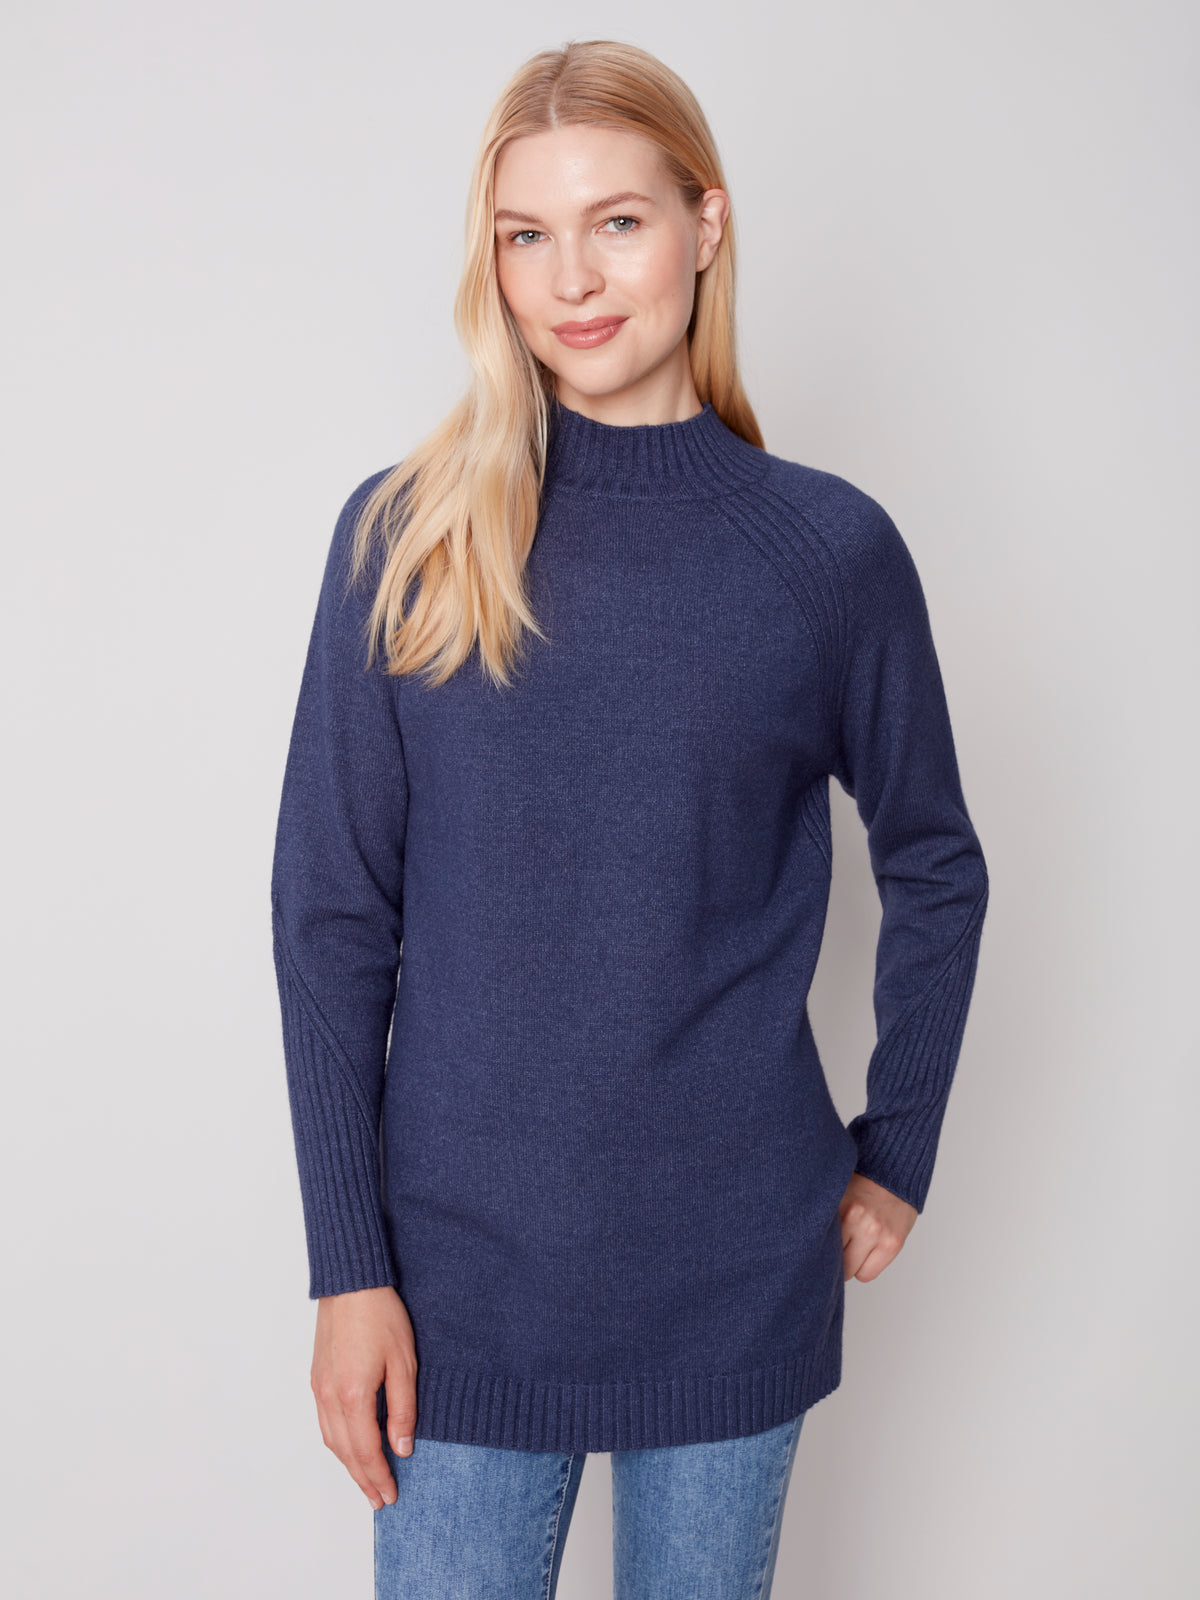 The Danielle Sweater-Navy